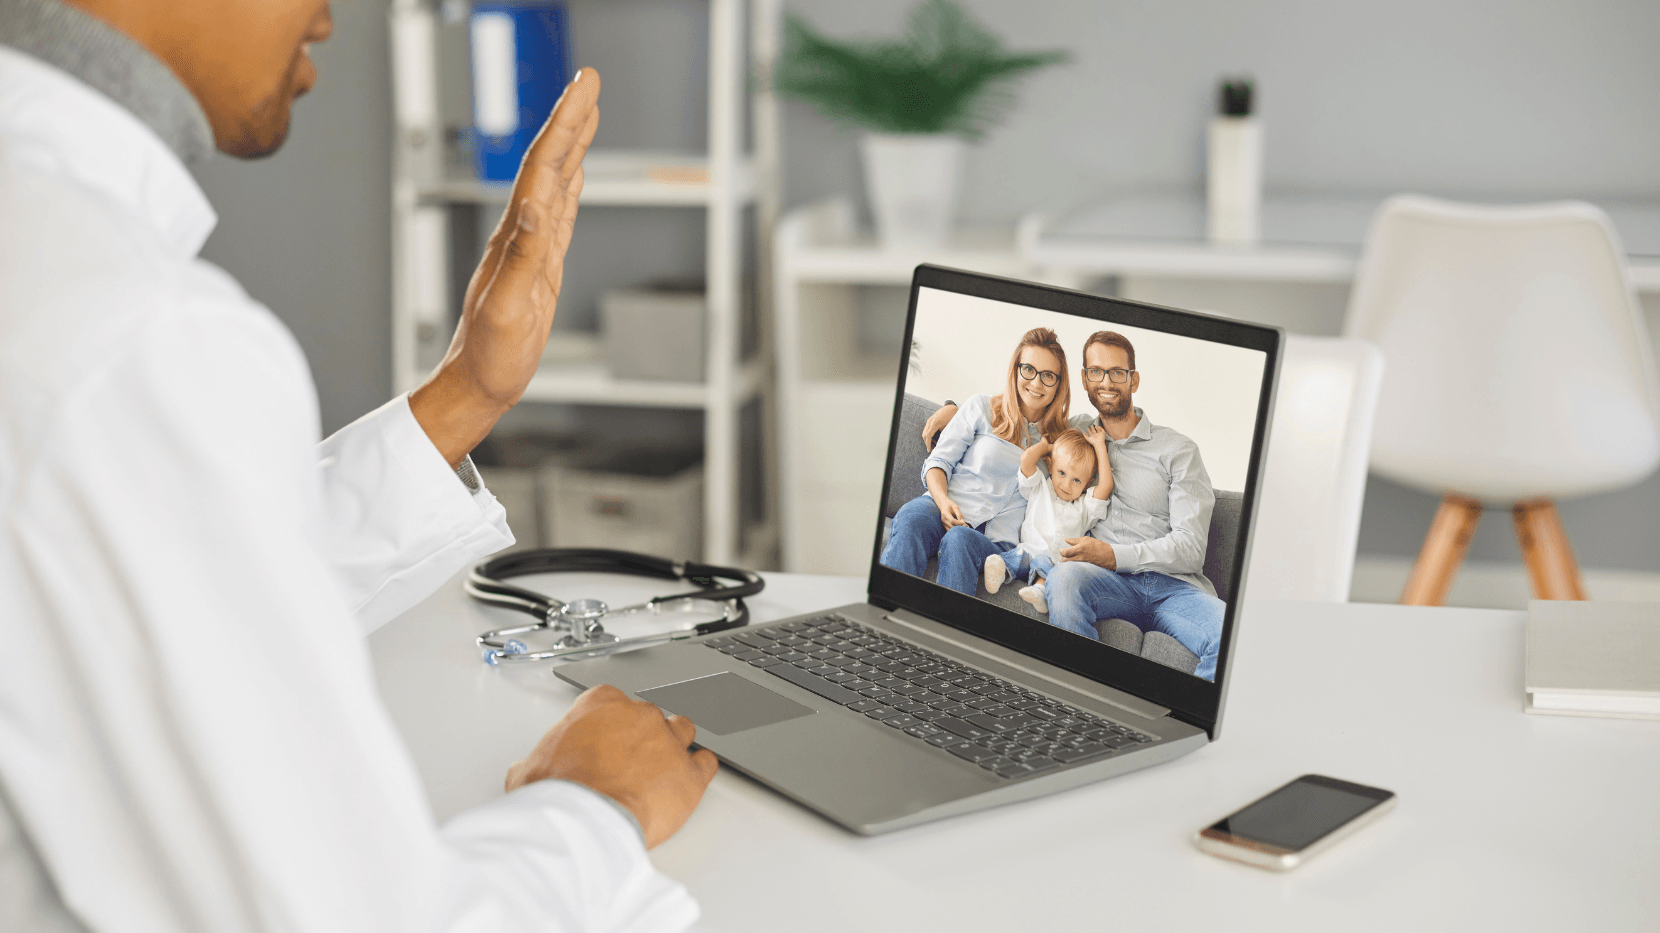 A Remote Telehealth call between a family and a pediatrician